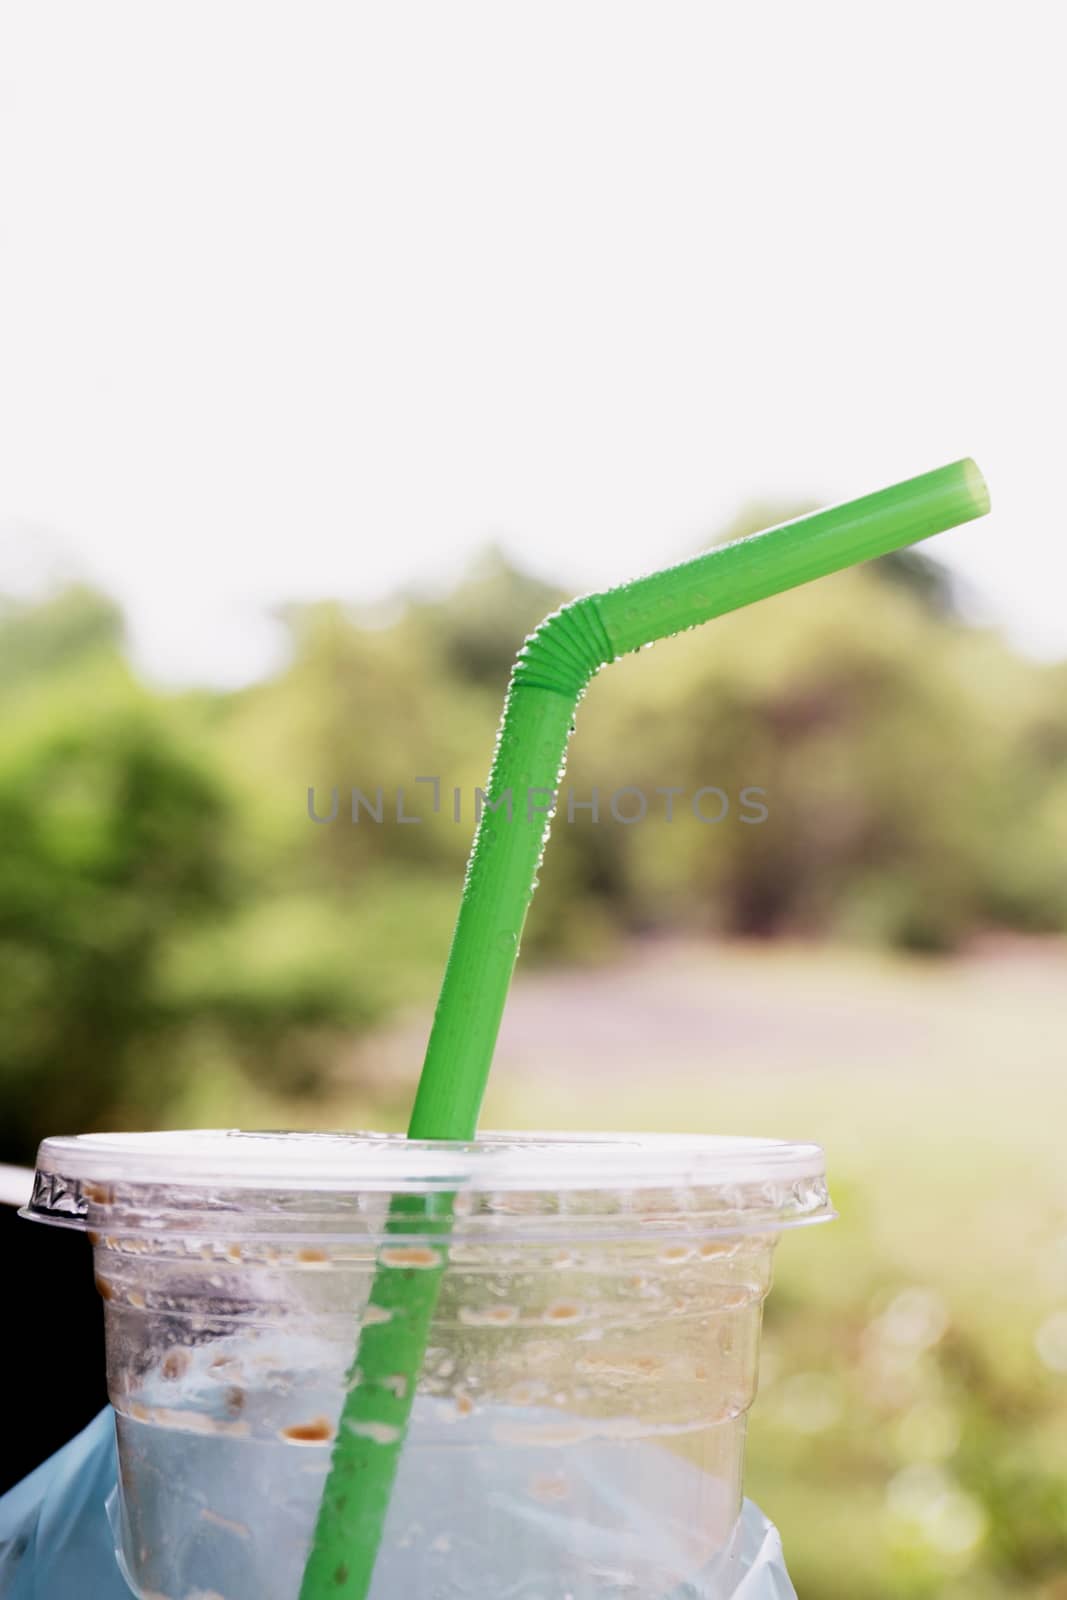 straw green tube refreshed with condensation of water ice, fresh lifestyle by cgdeaw